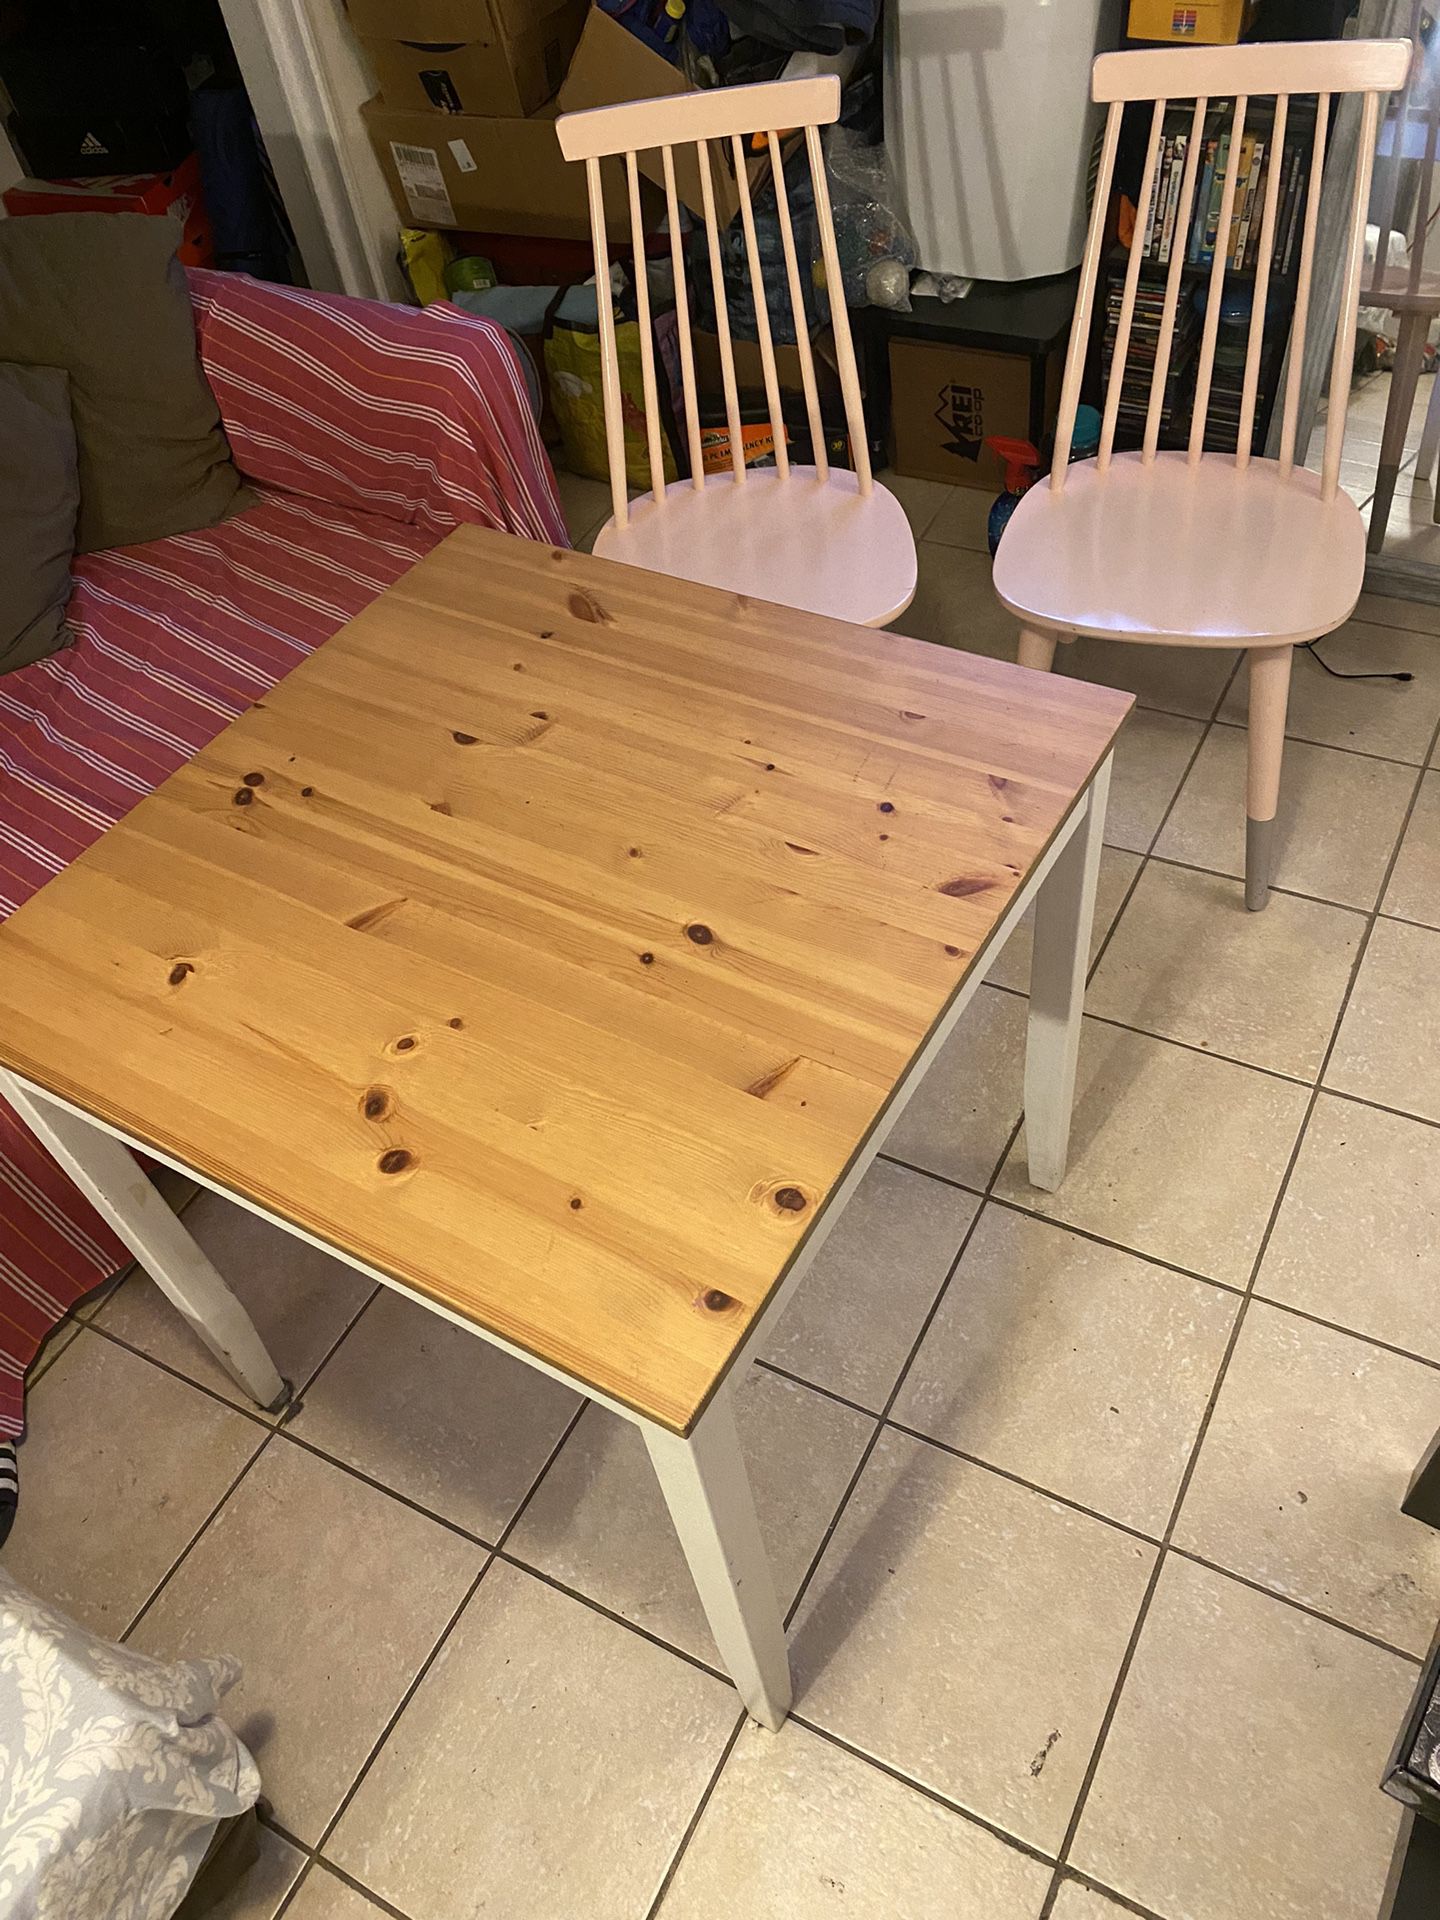 Table (Kitchen, Breakfast, nook) With Chairs